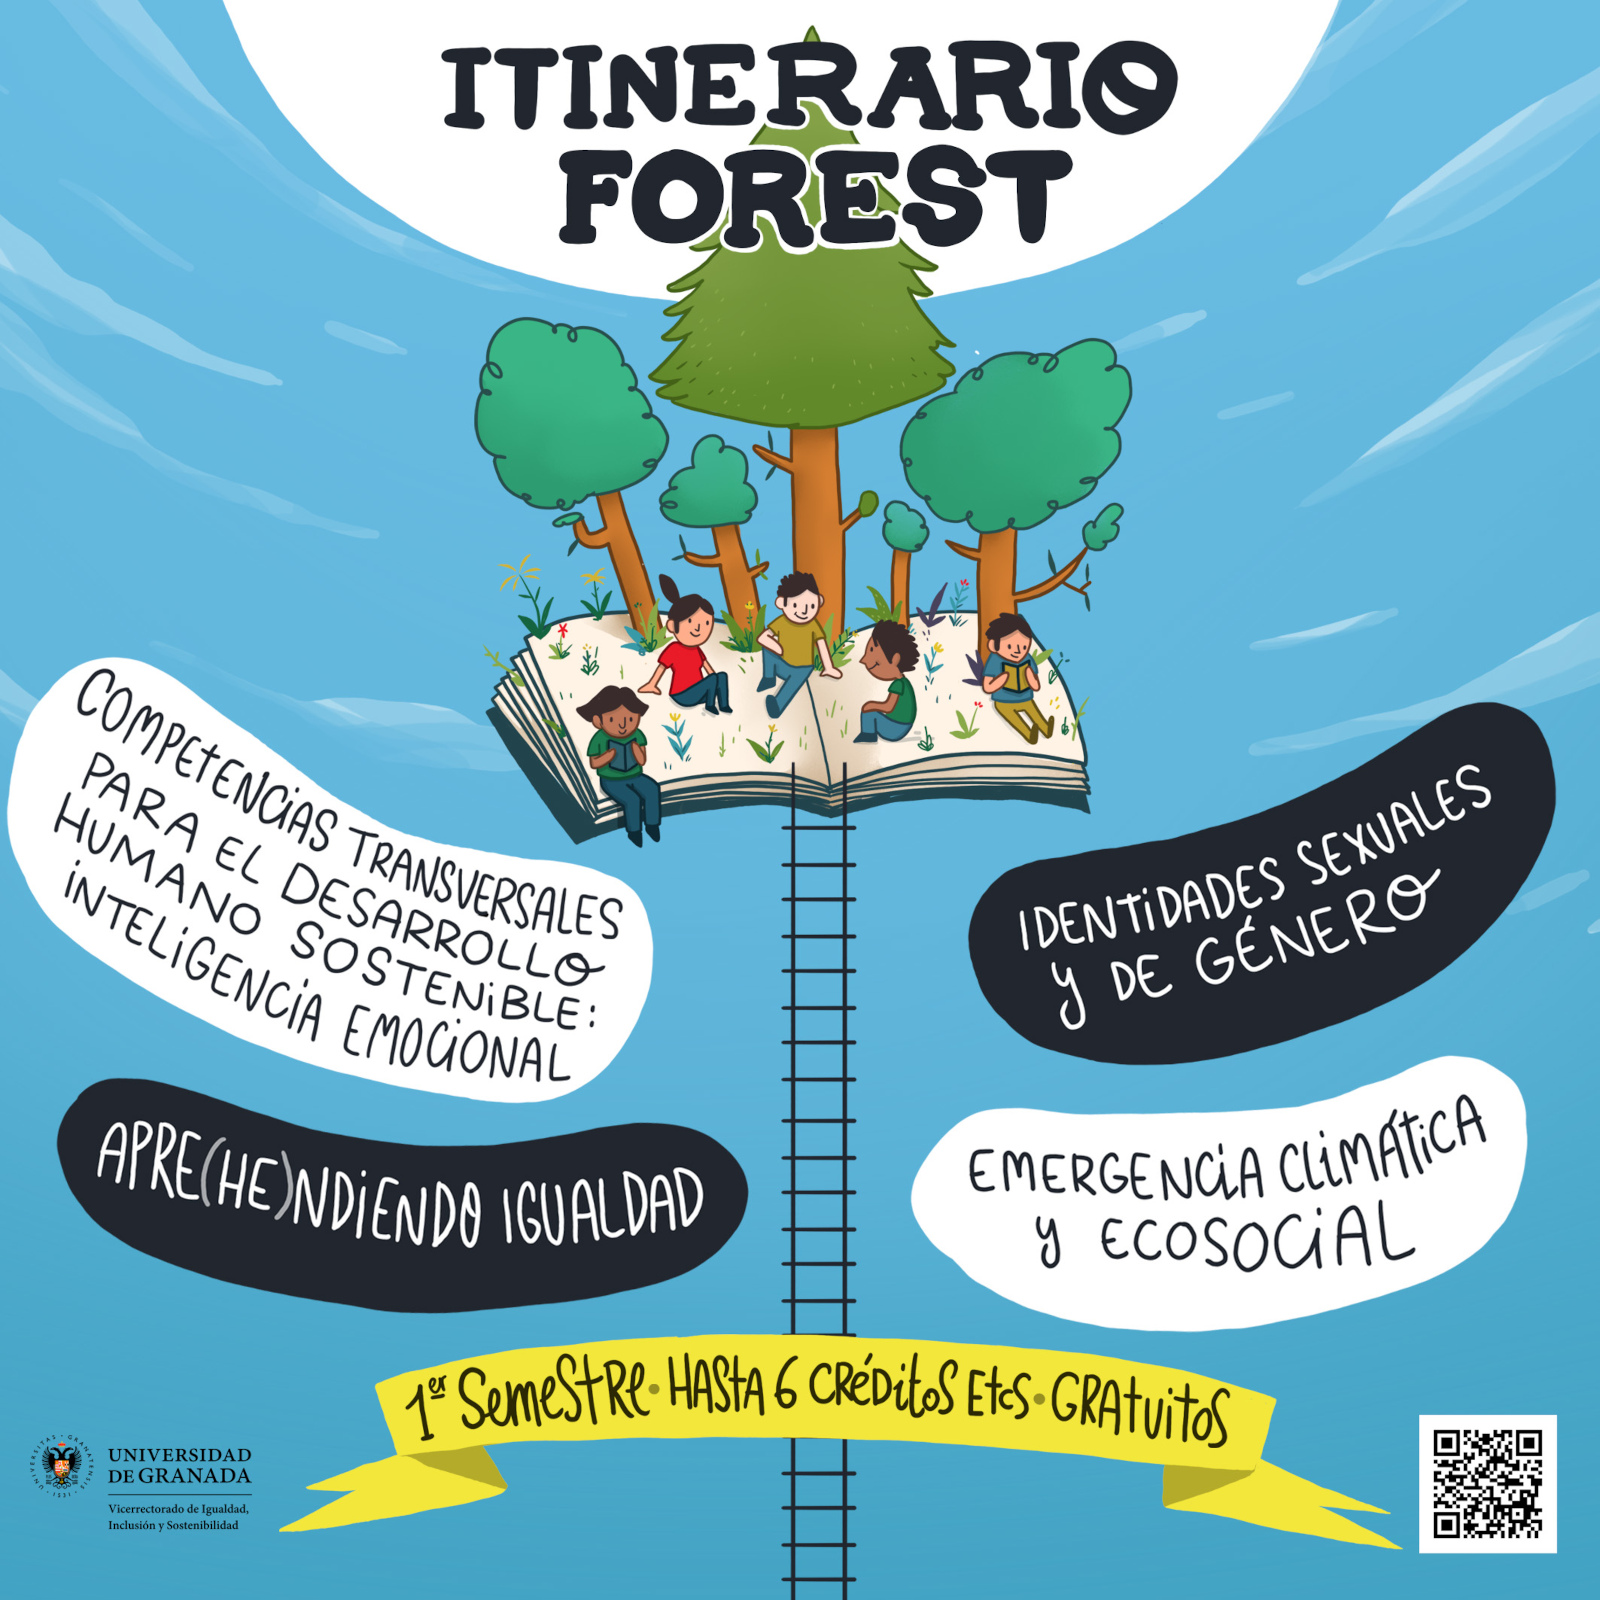 Itinerario FOREST